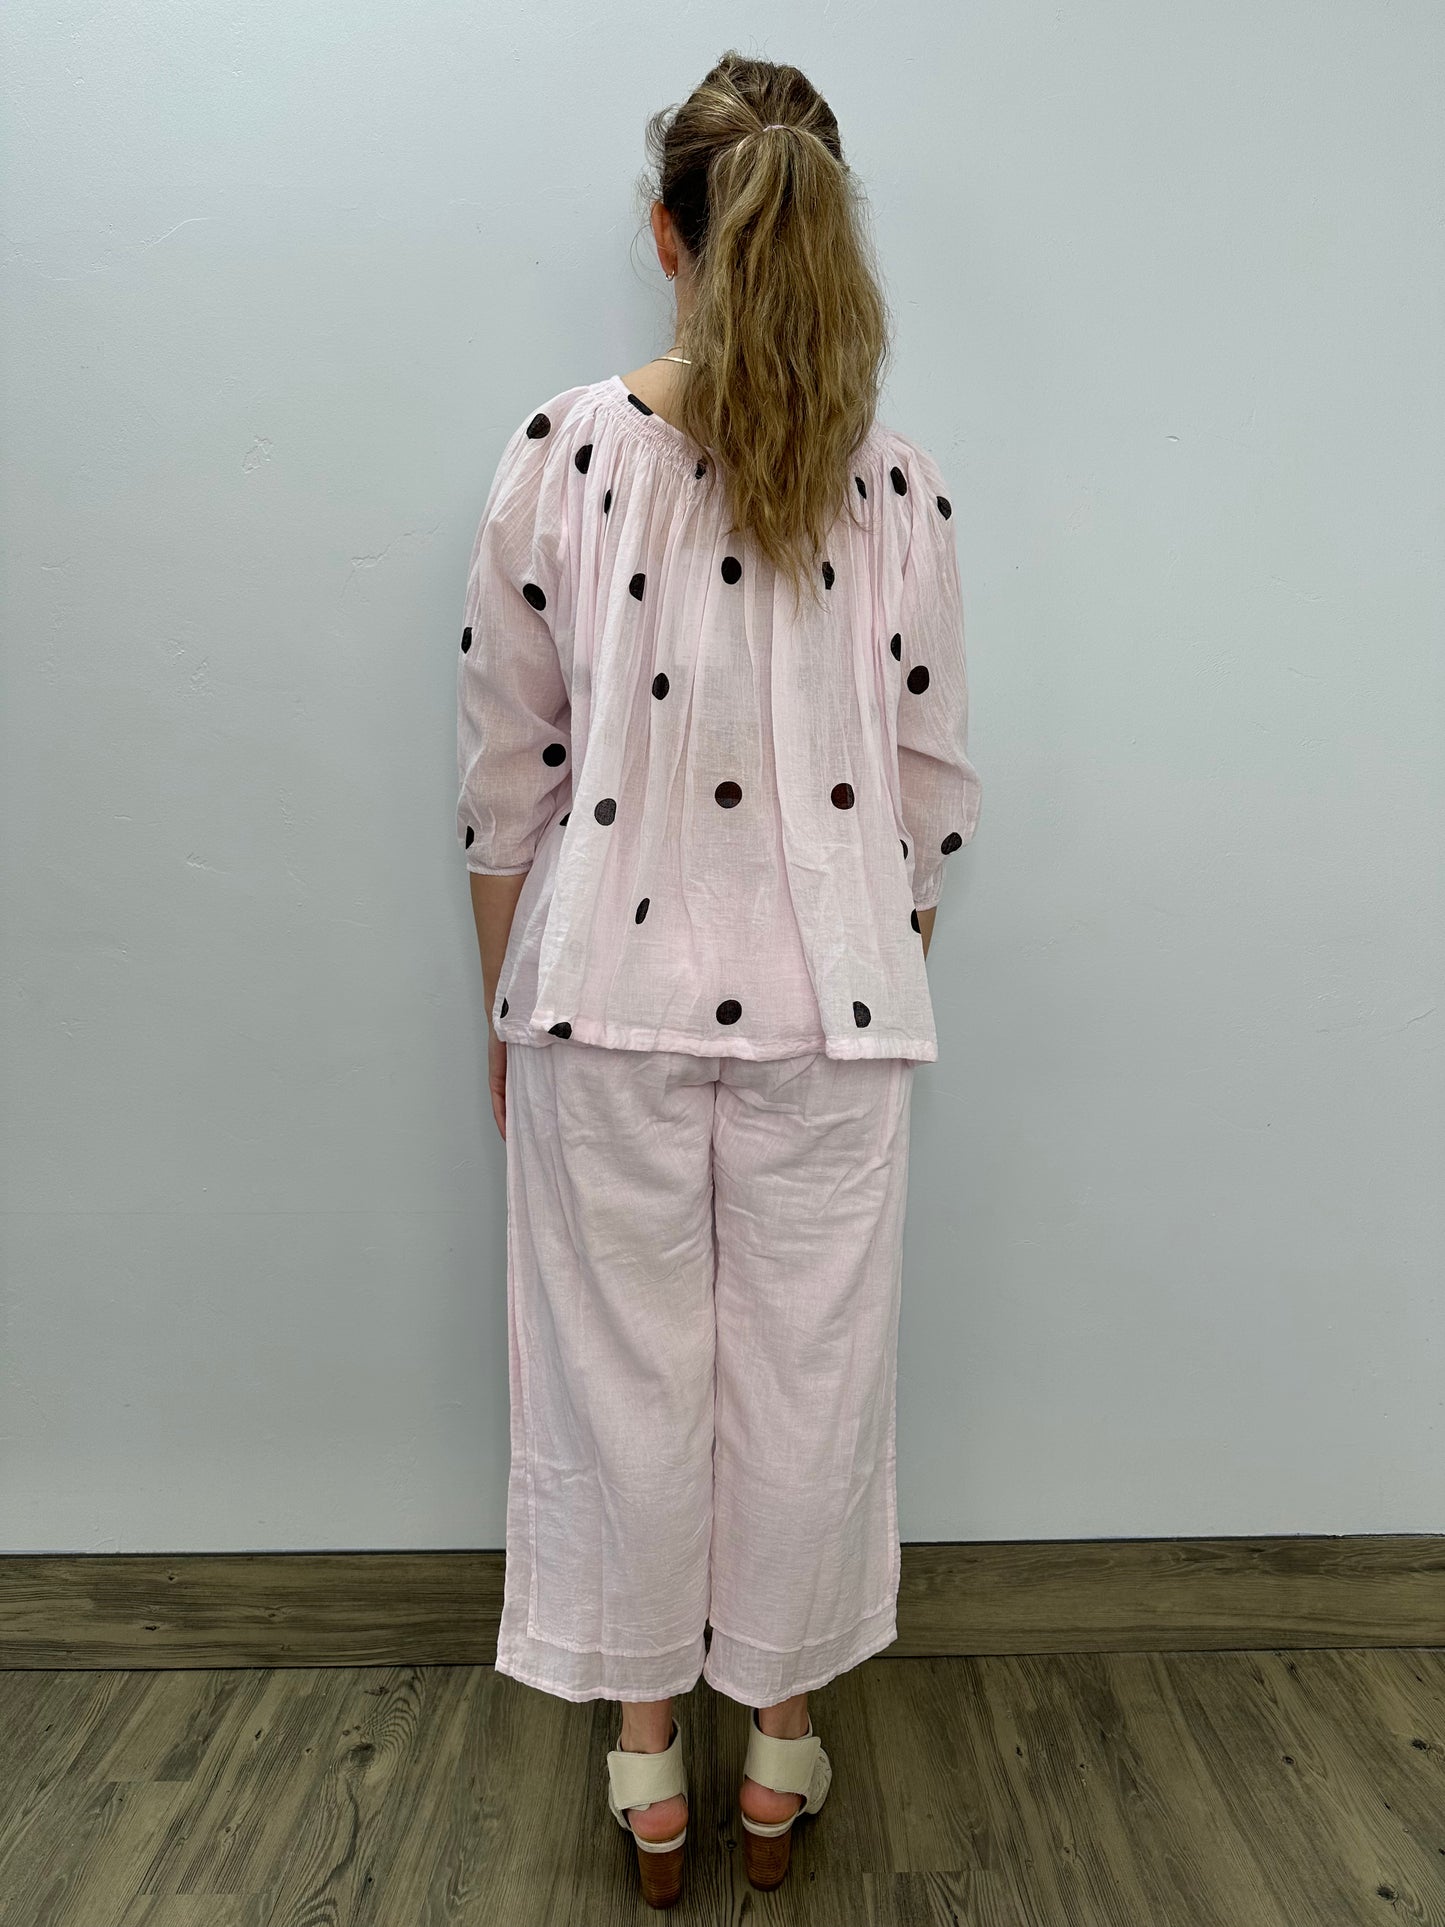 Pink Polka Dot Top with Gathers on Neckline and 3/4 Sleeves - One Size